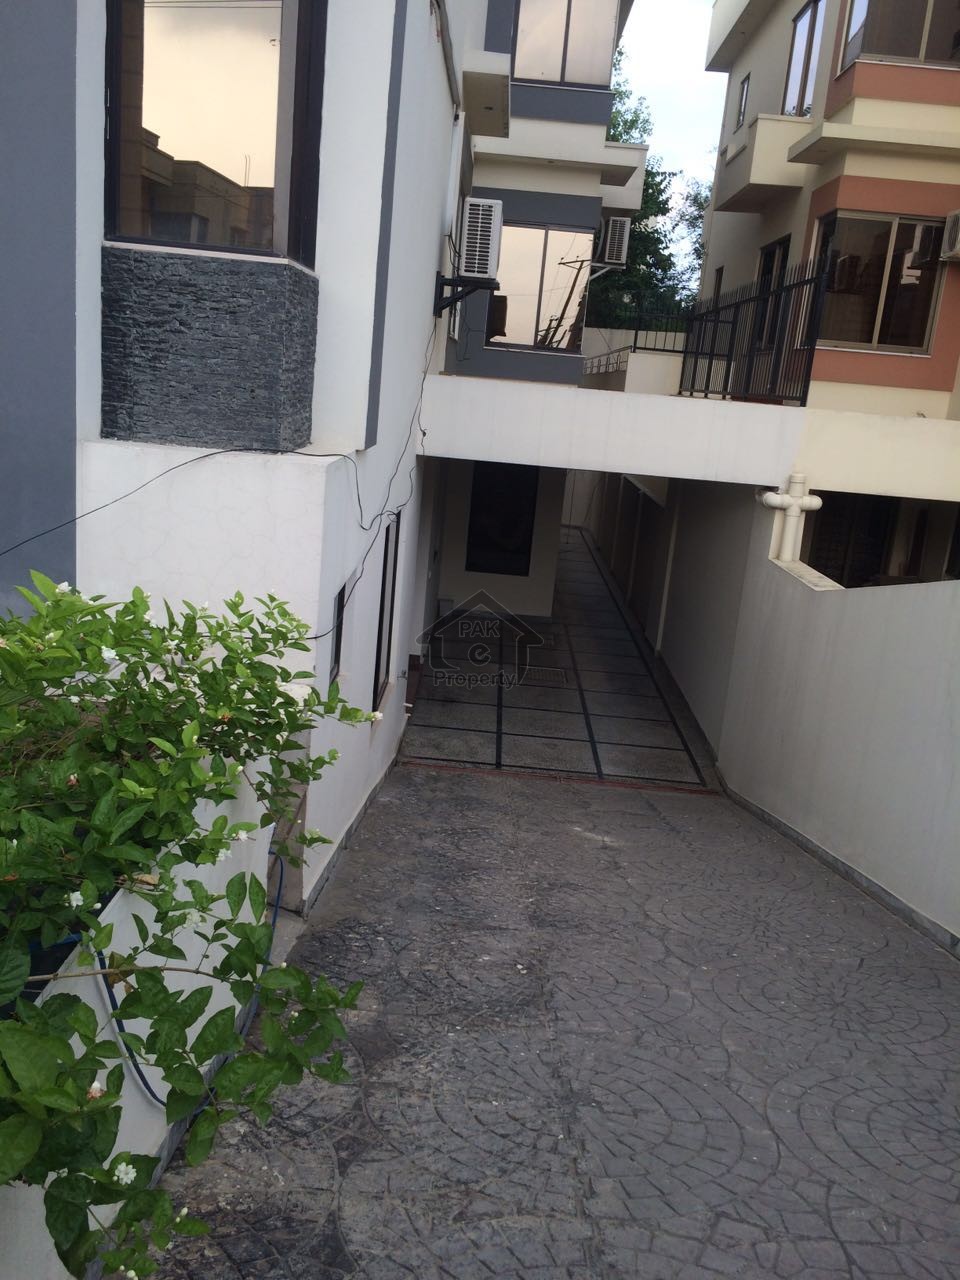 10 Marla New Double Storey House For Sale In Pwd Society Islamabad